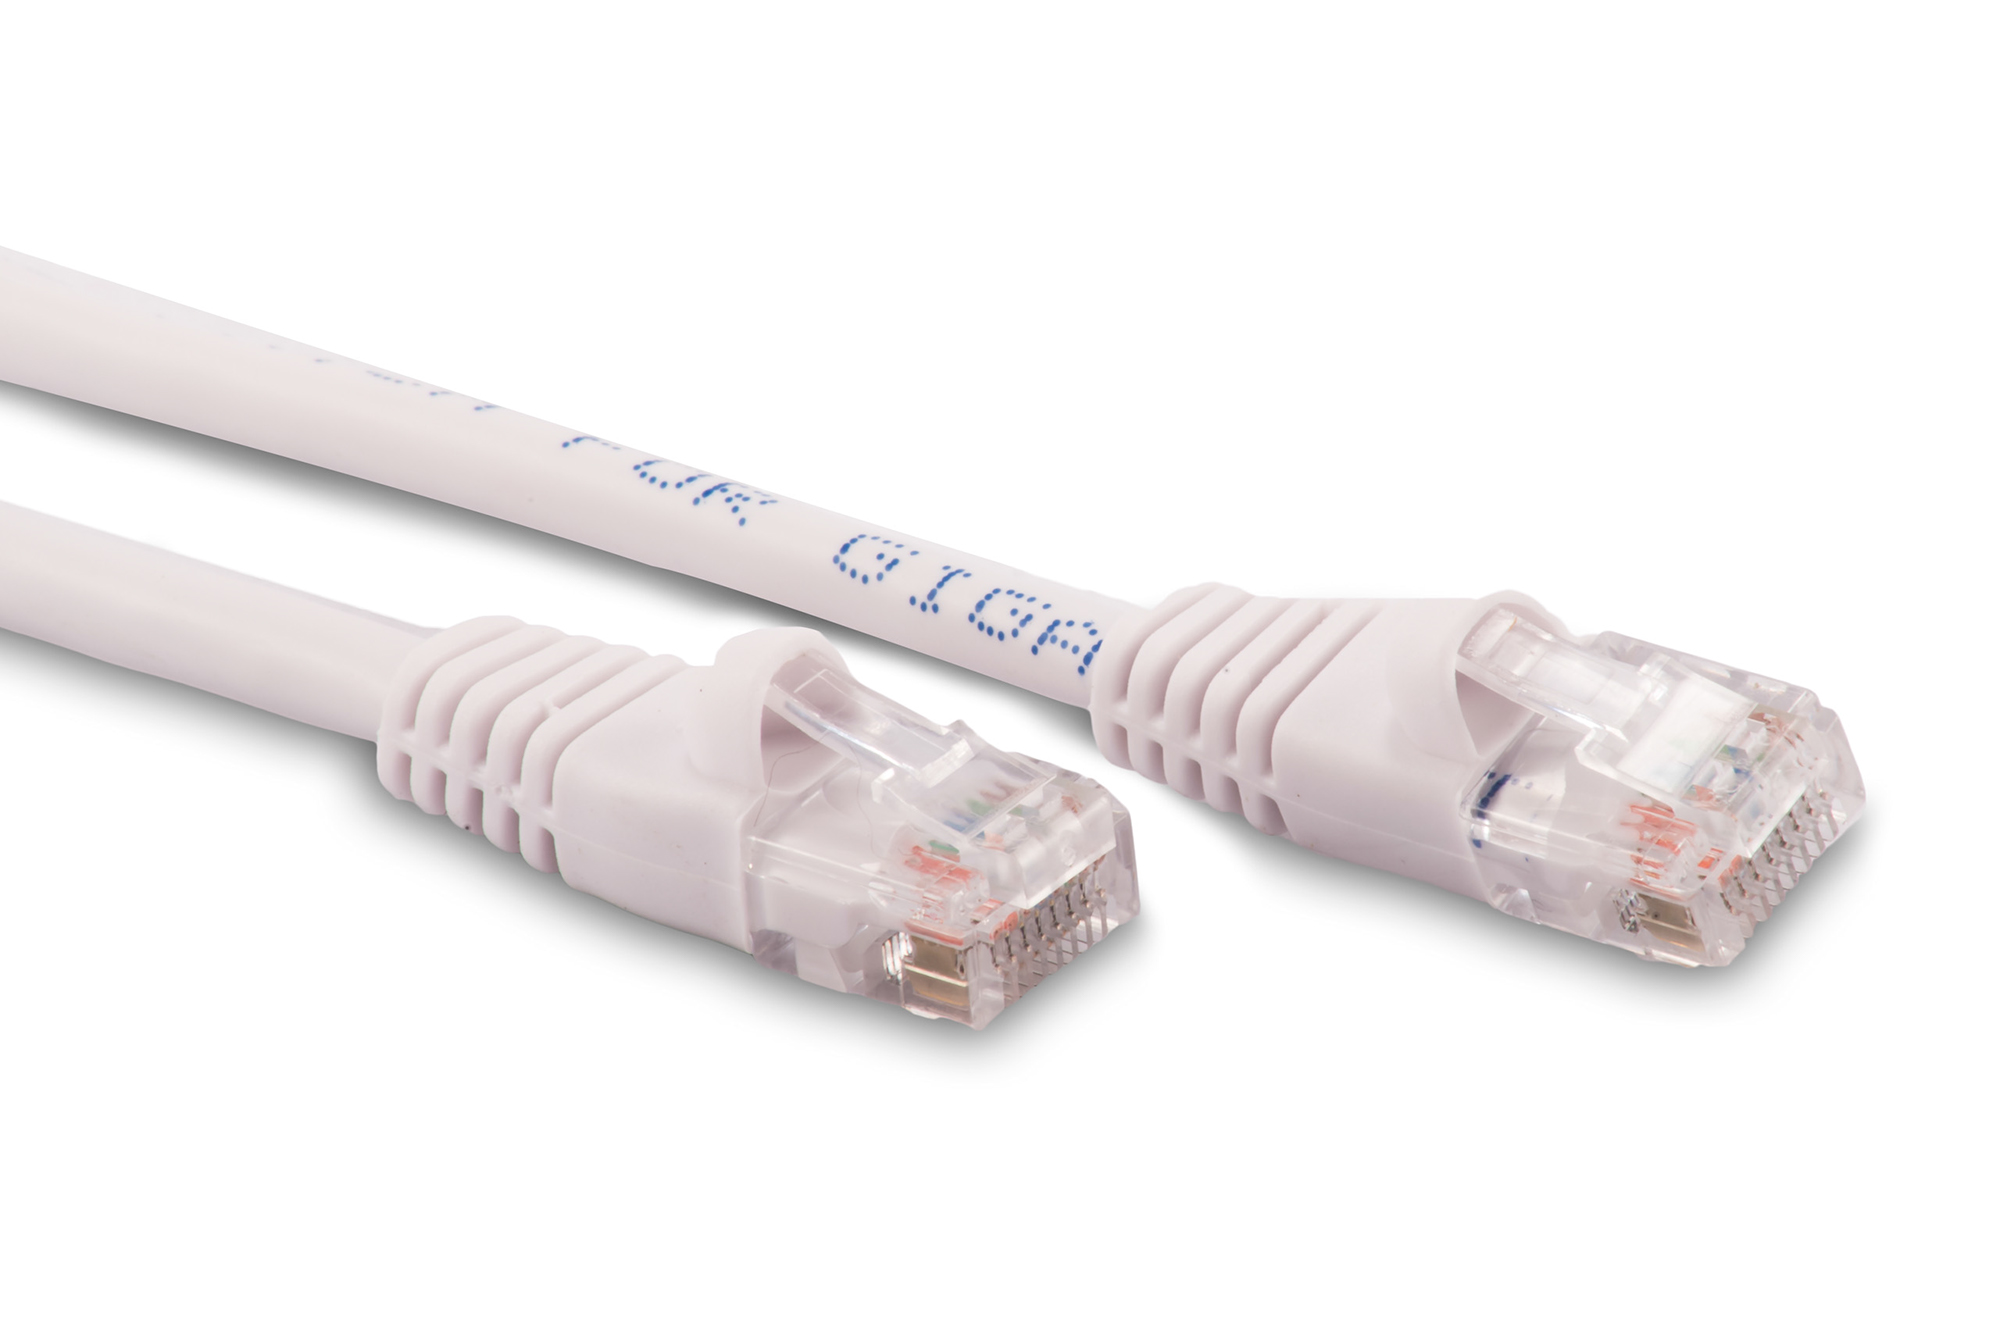 4ft Cat6 Ethernet Patch Cable - White Color - Snagless Boot